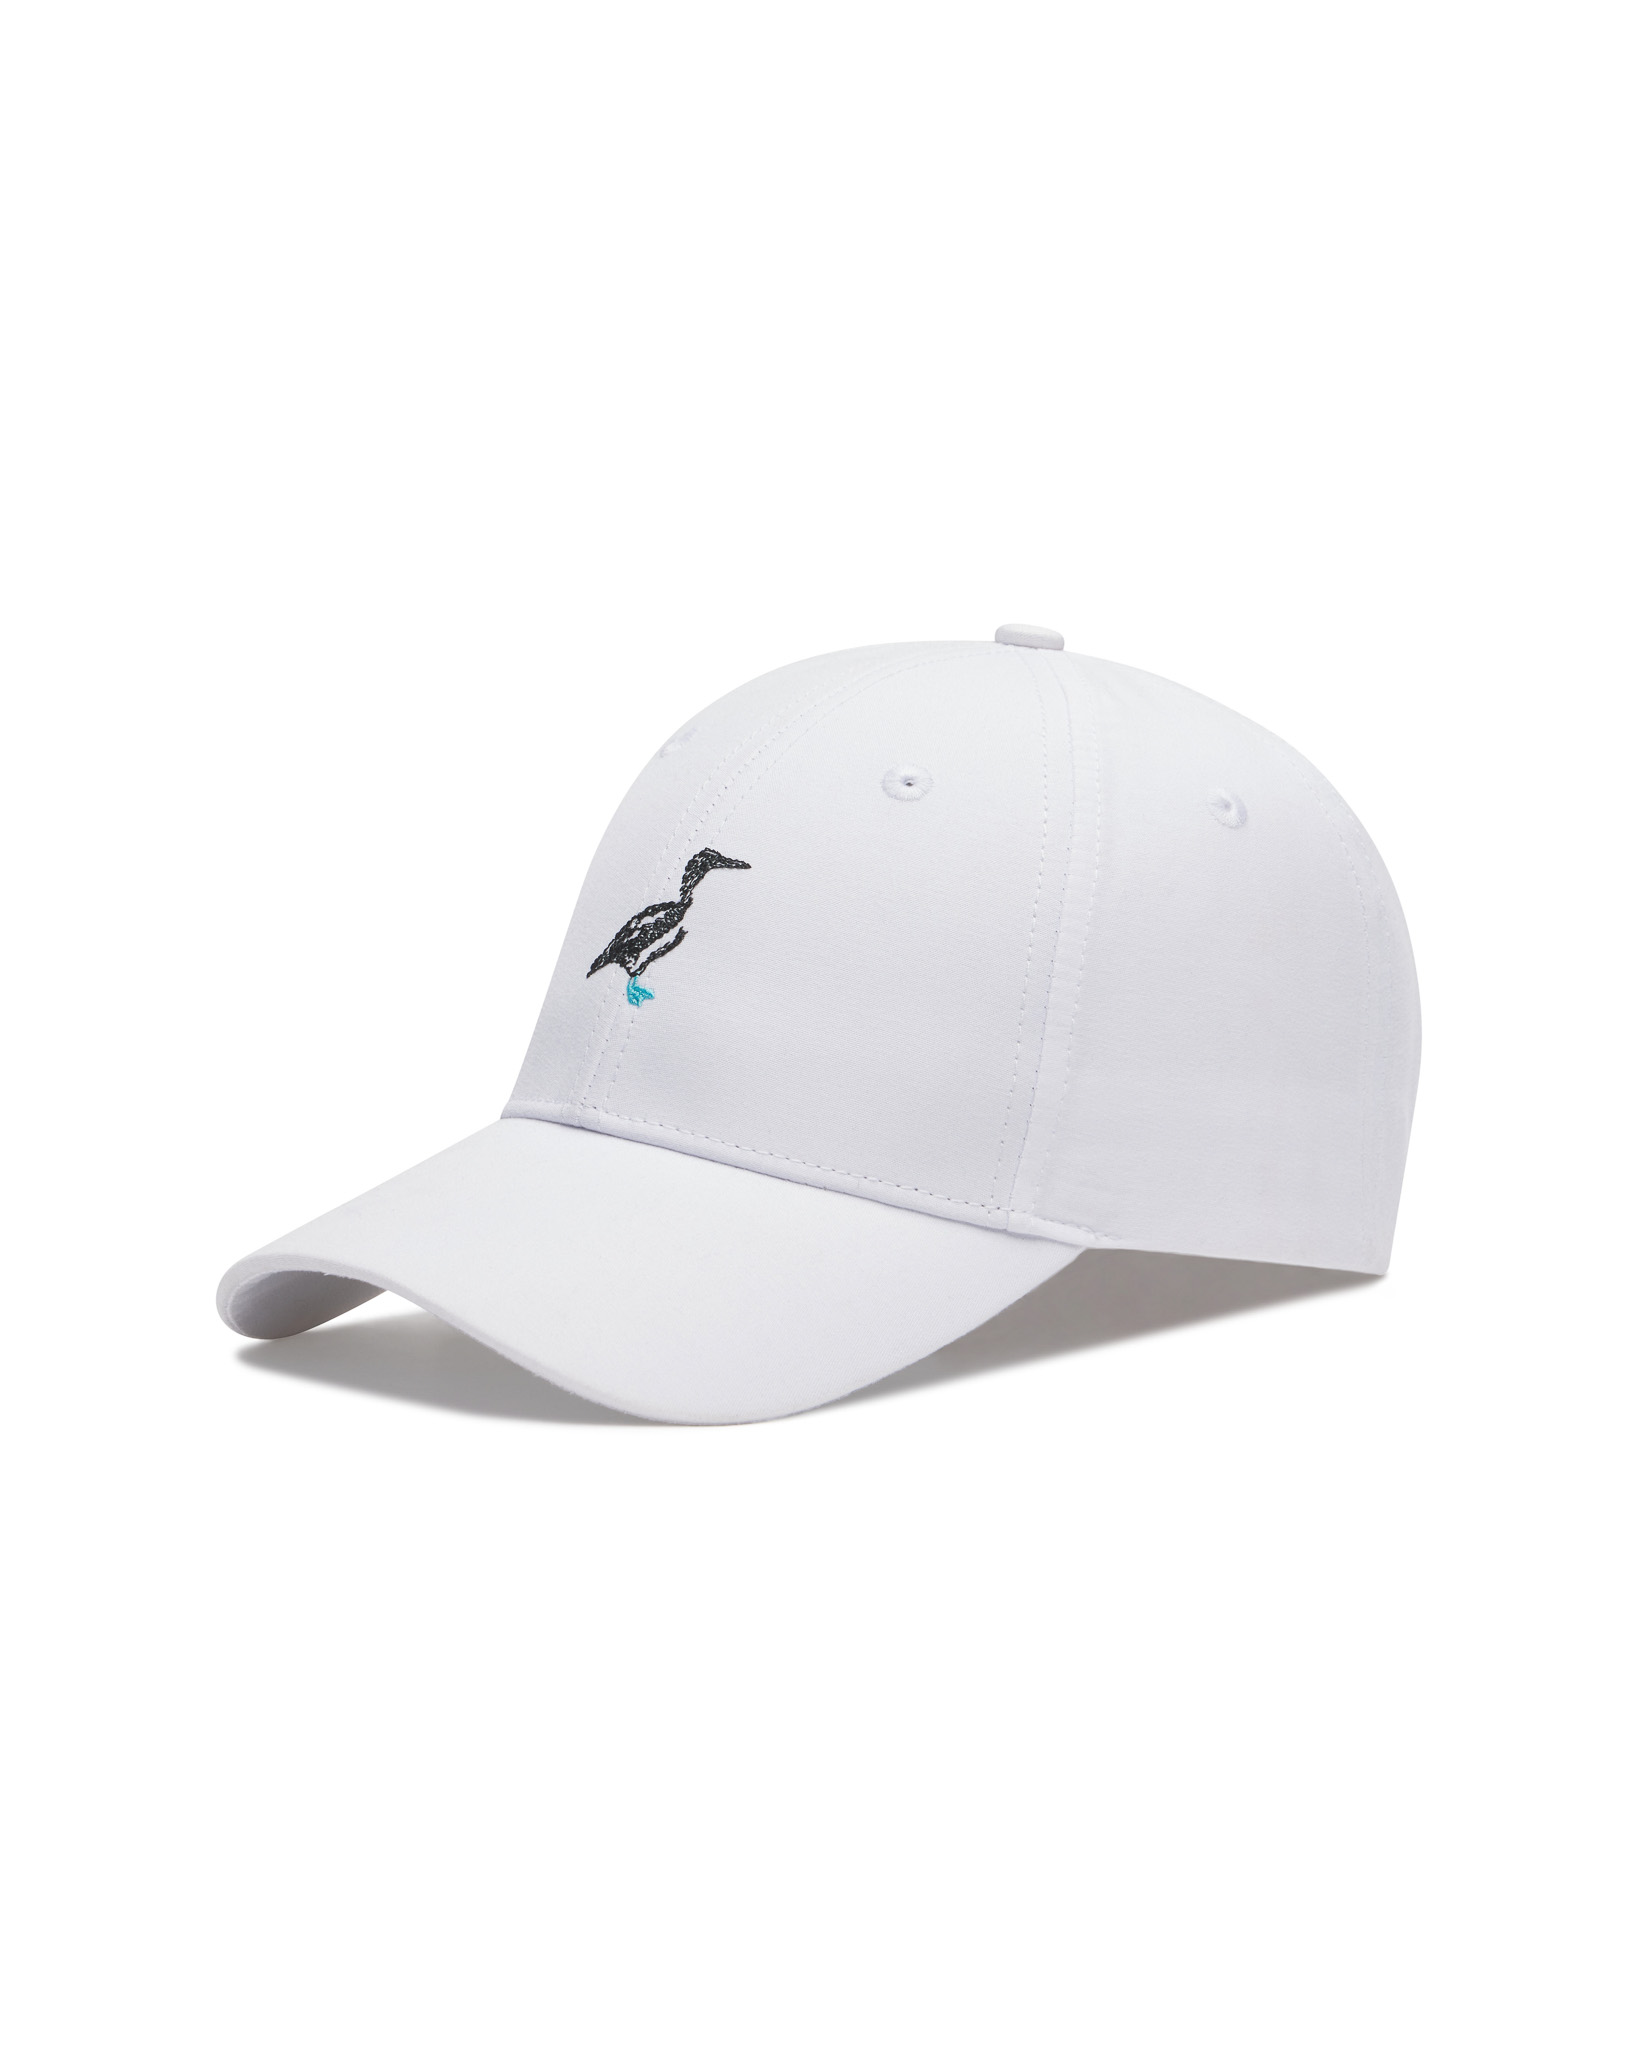 MANTRA PERFORMANCE HAT - WHITE - BLUE FOOTED BOOBY ICON